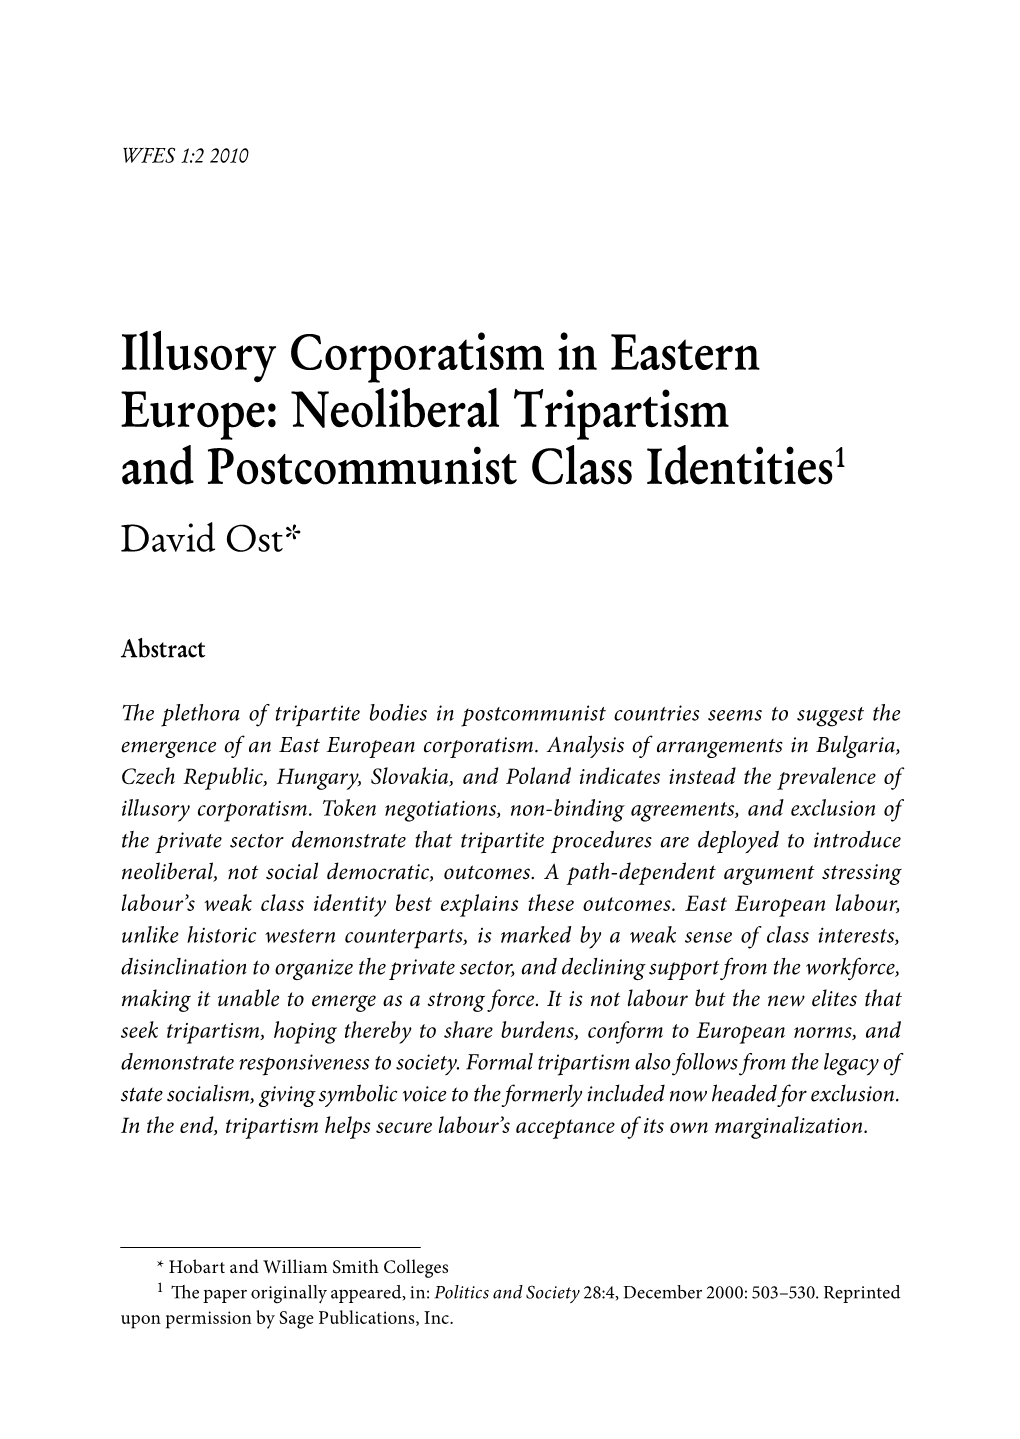 Illusory Corporatism in Eastern Europe: Neoliberal Tripartism and Postcommunist Class Identities1 David Ost*